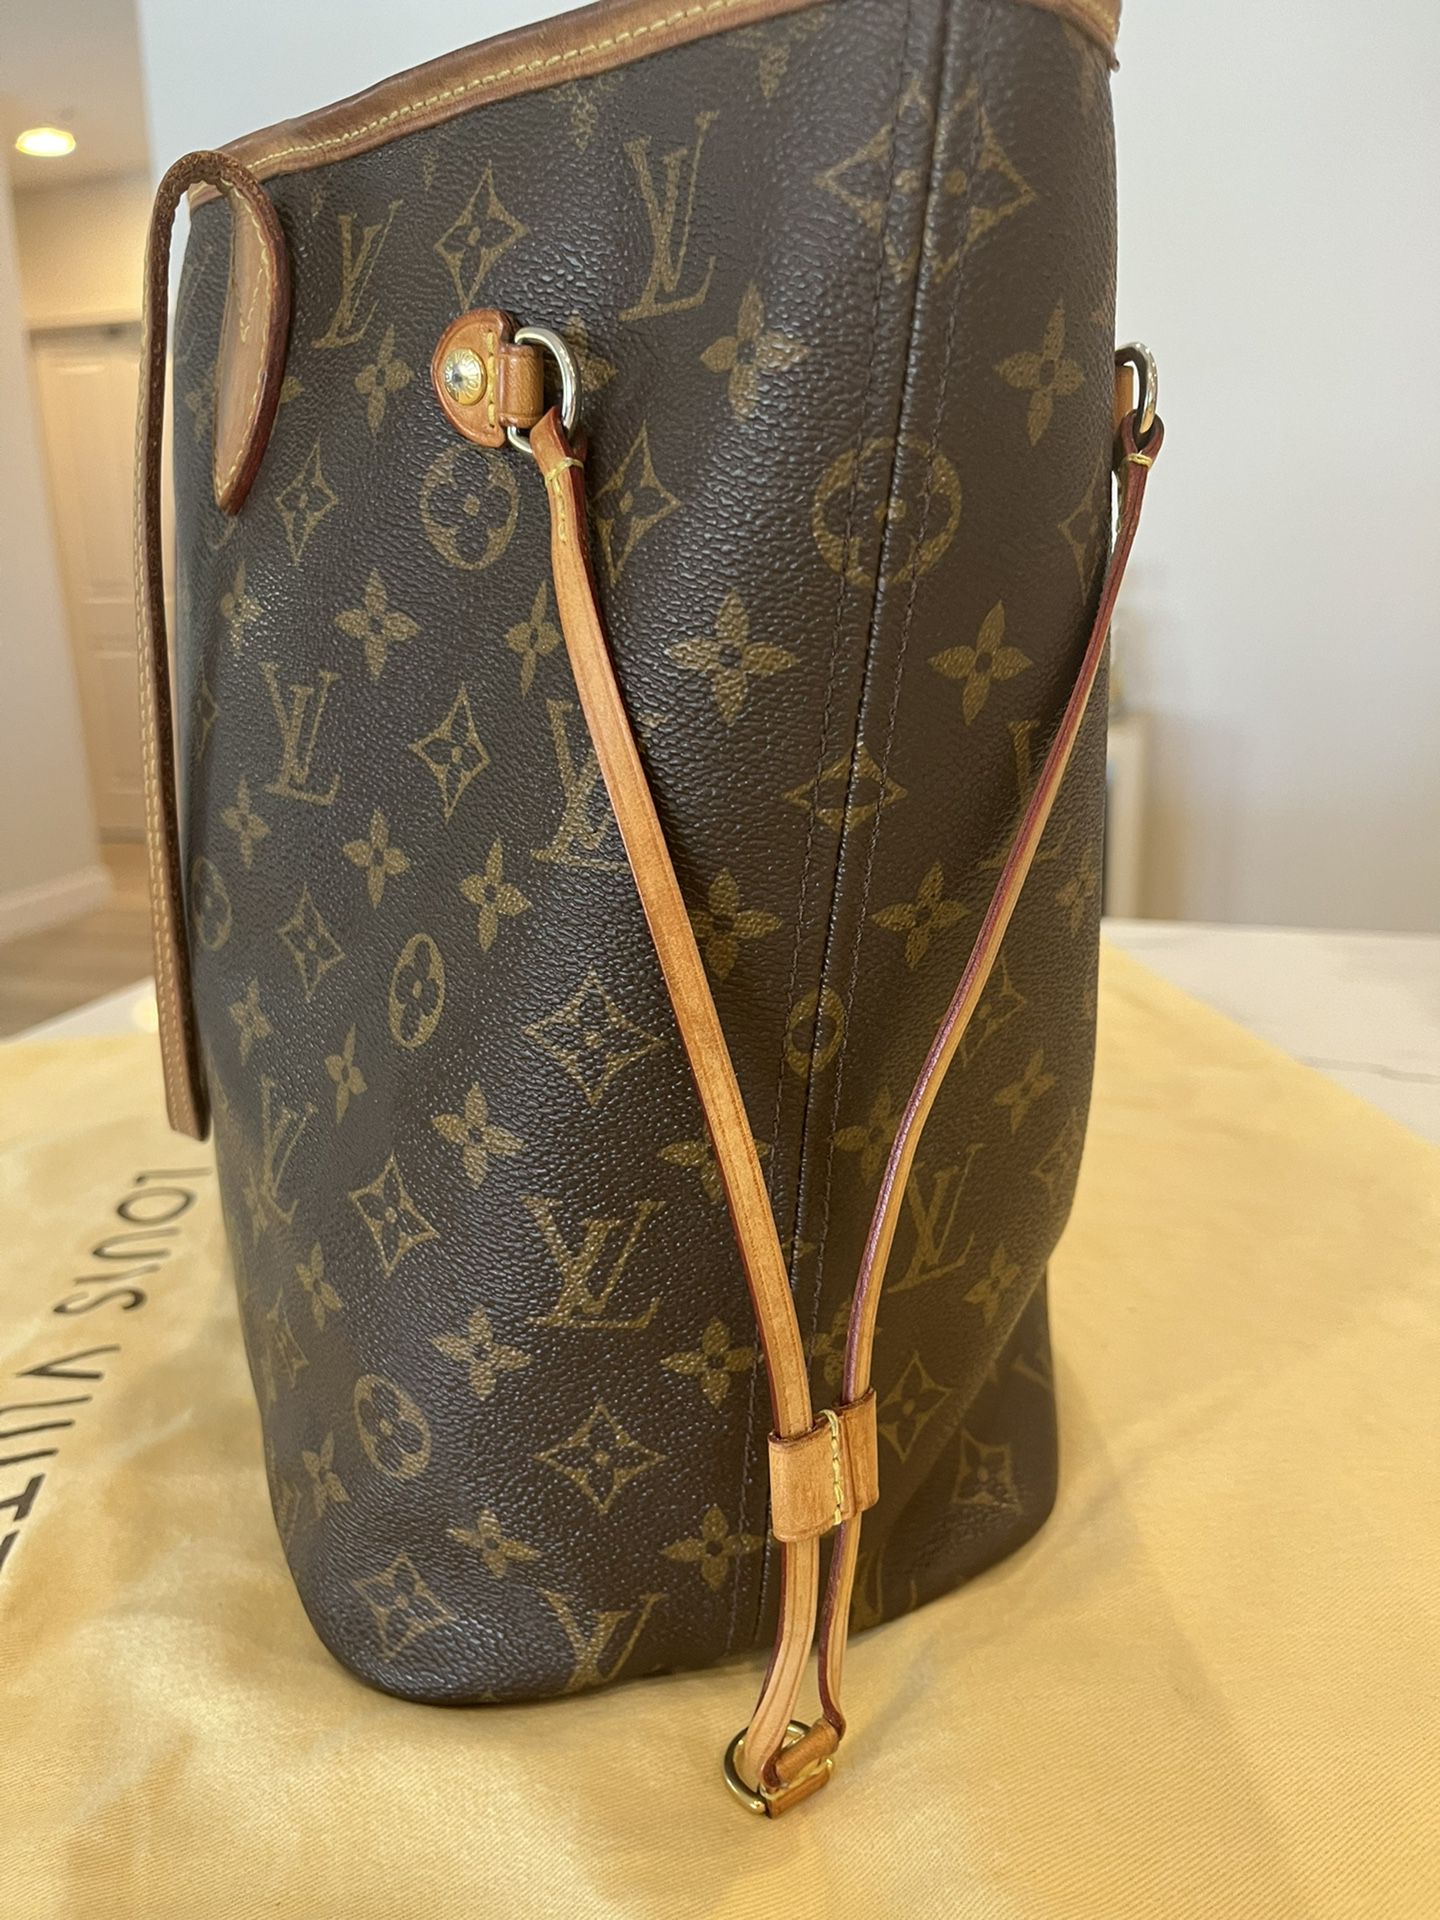 SOLD ⭐️ Authentic Louis Vuitton Neverfull MM ❤️  Louis vuitton neverfull  mm, Louis vuitton bag neverfull, Authentic louis vuitton